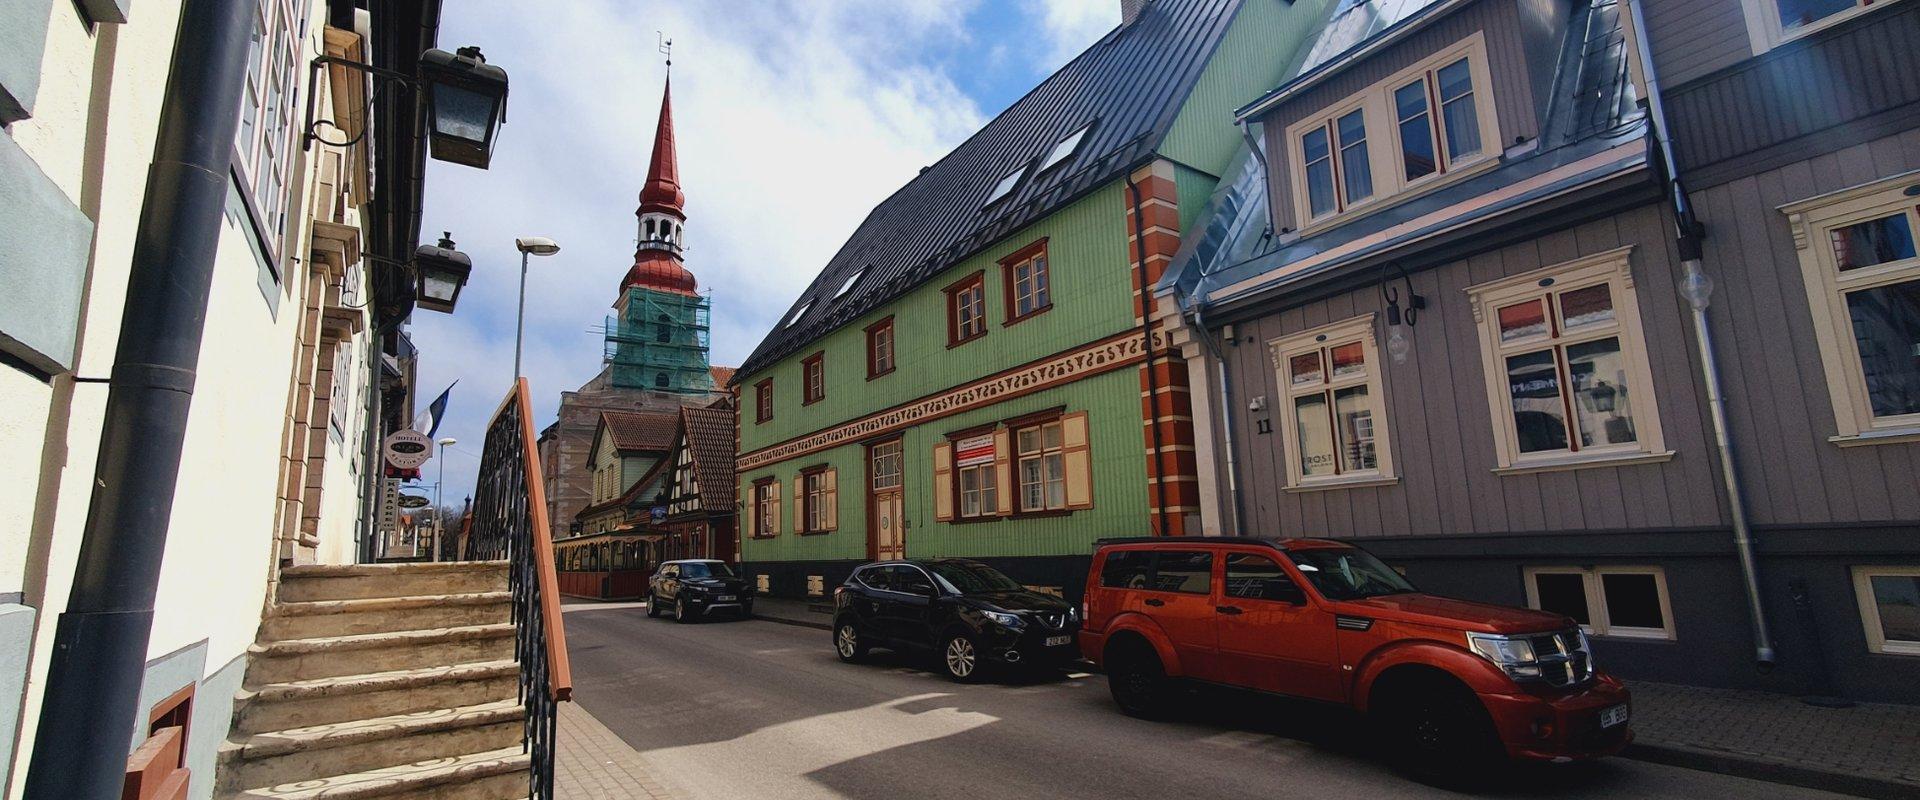 Guided tour of the history of the Russian Empire in Pärnu